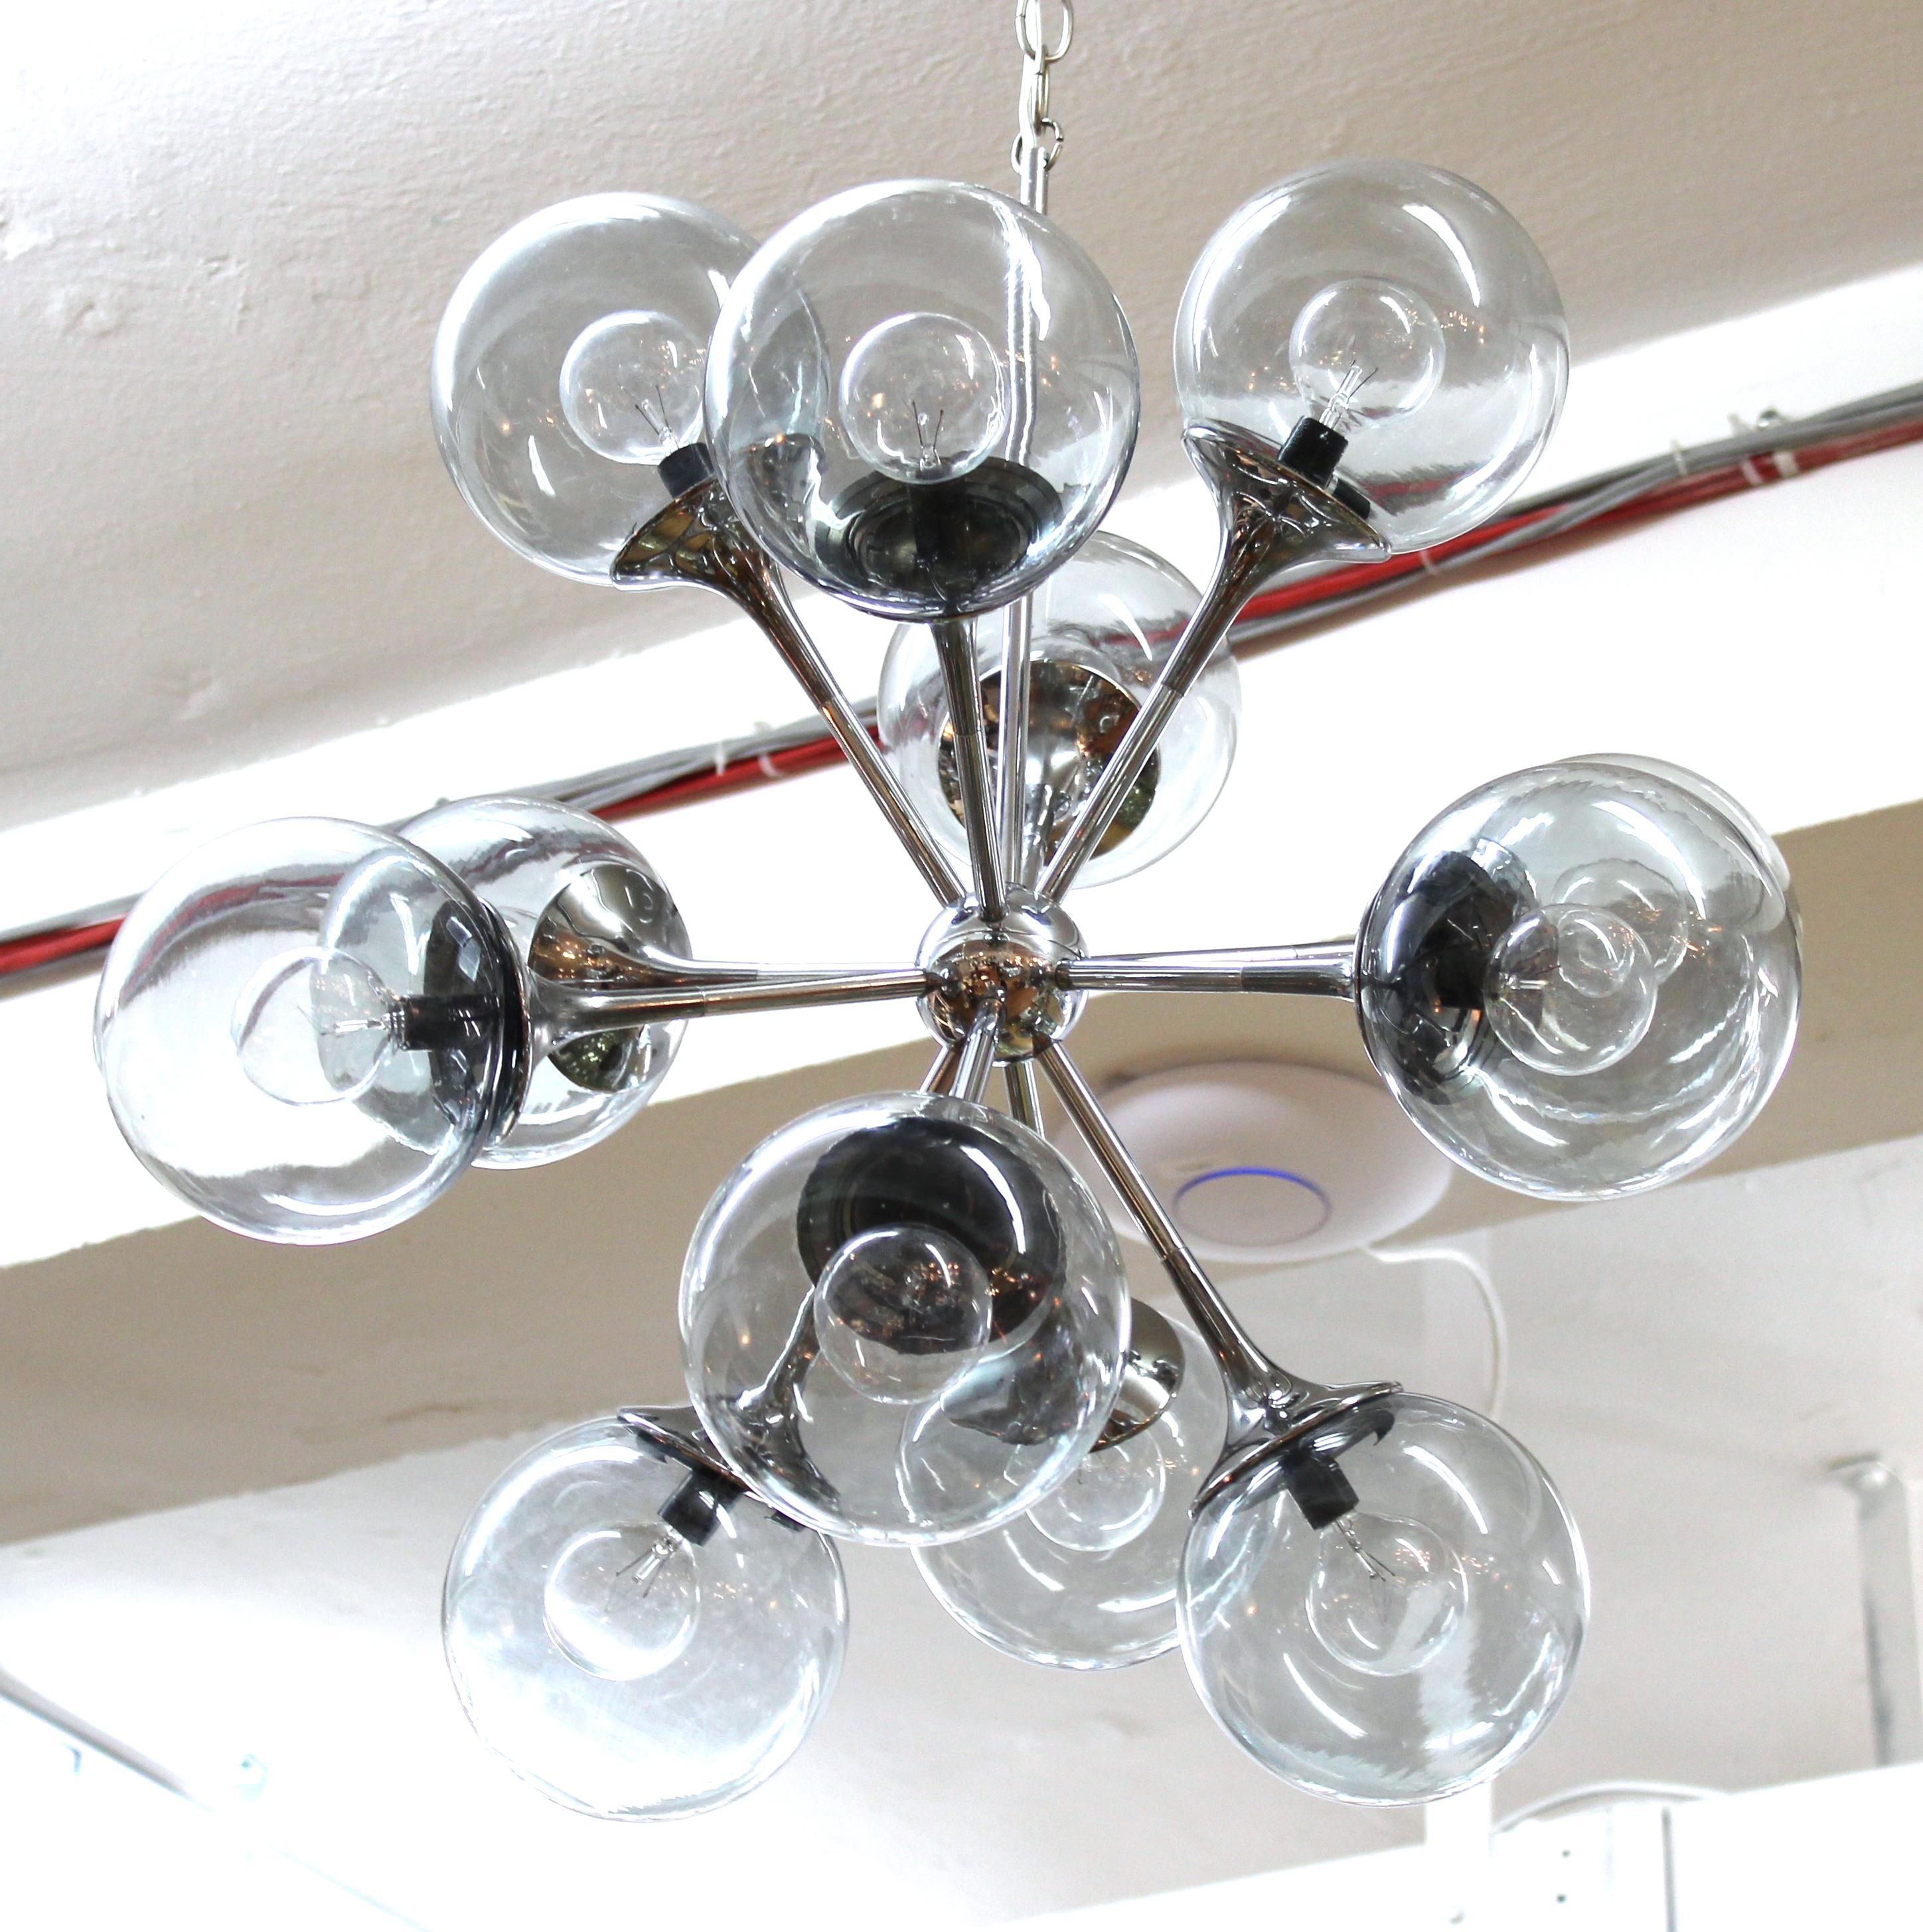 Lightolier American Mid-Century Modern chrome Sputnik Space Age chandelier with glass dome shades, circa 1970's.